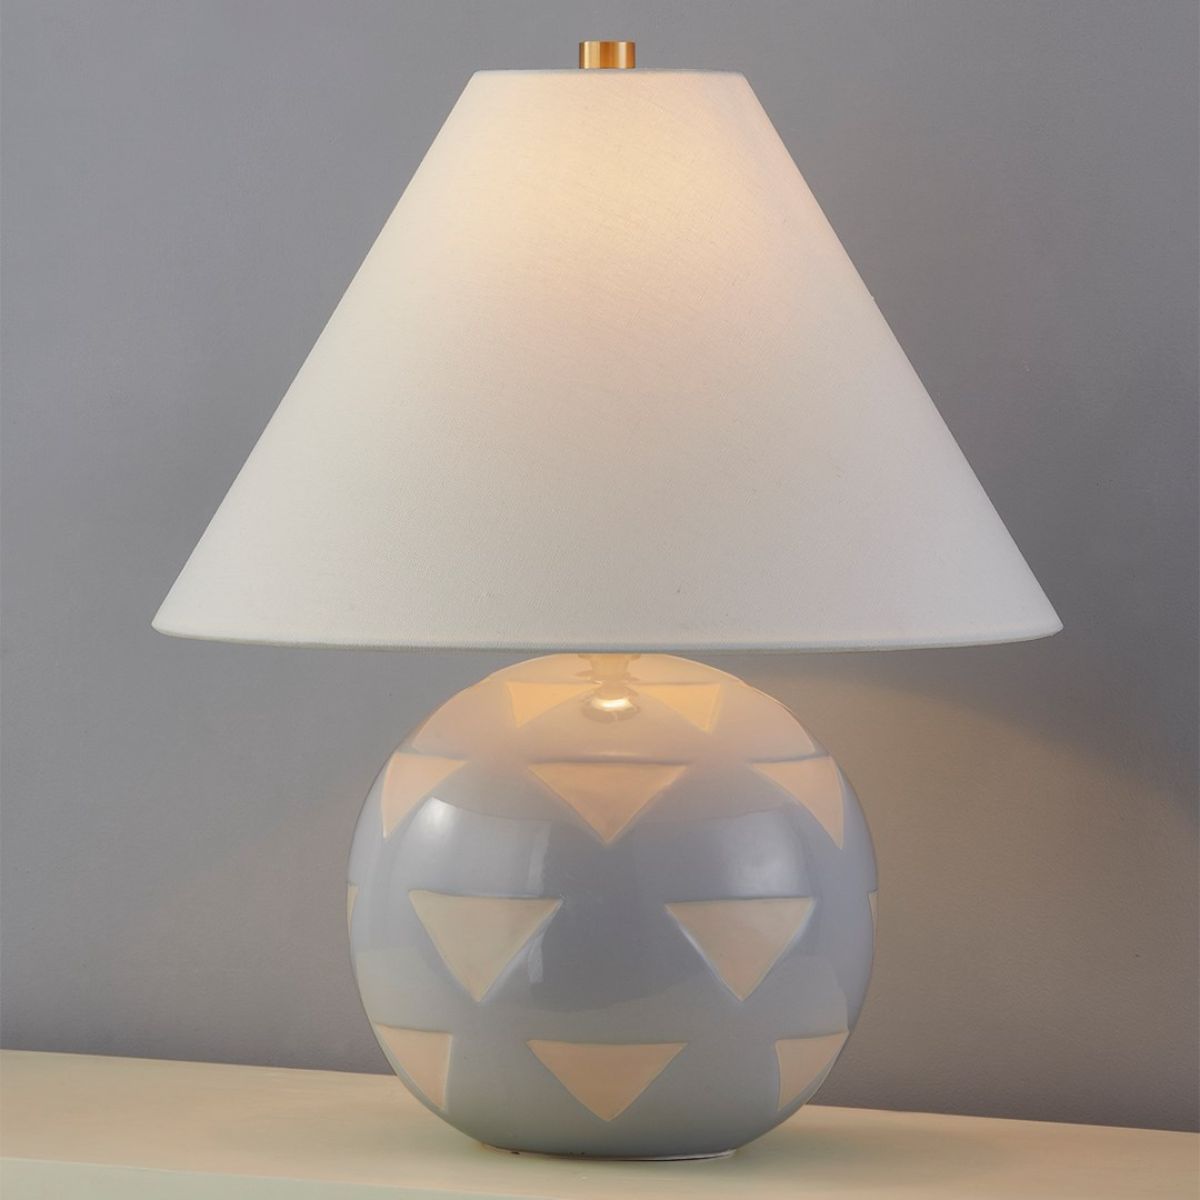 Minnie Round Table Lamp Ceramic Blue Geometric Pattern with Aged Brass Accents